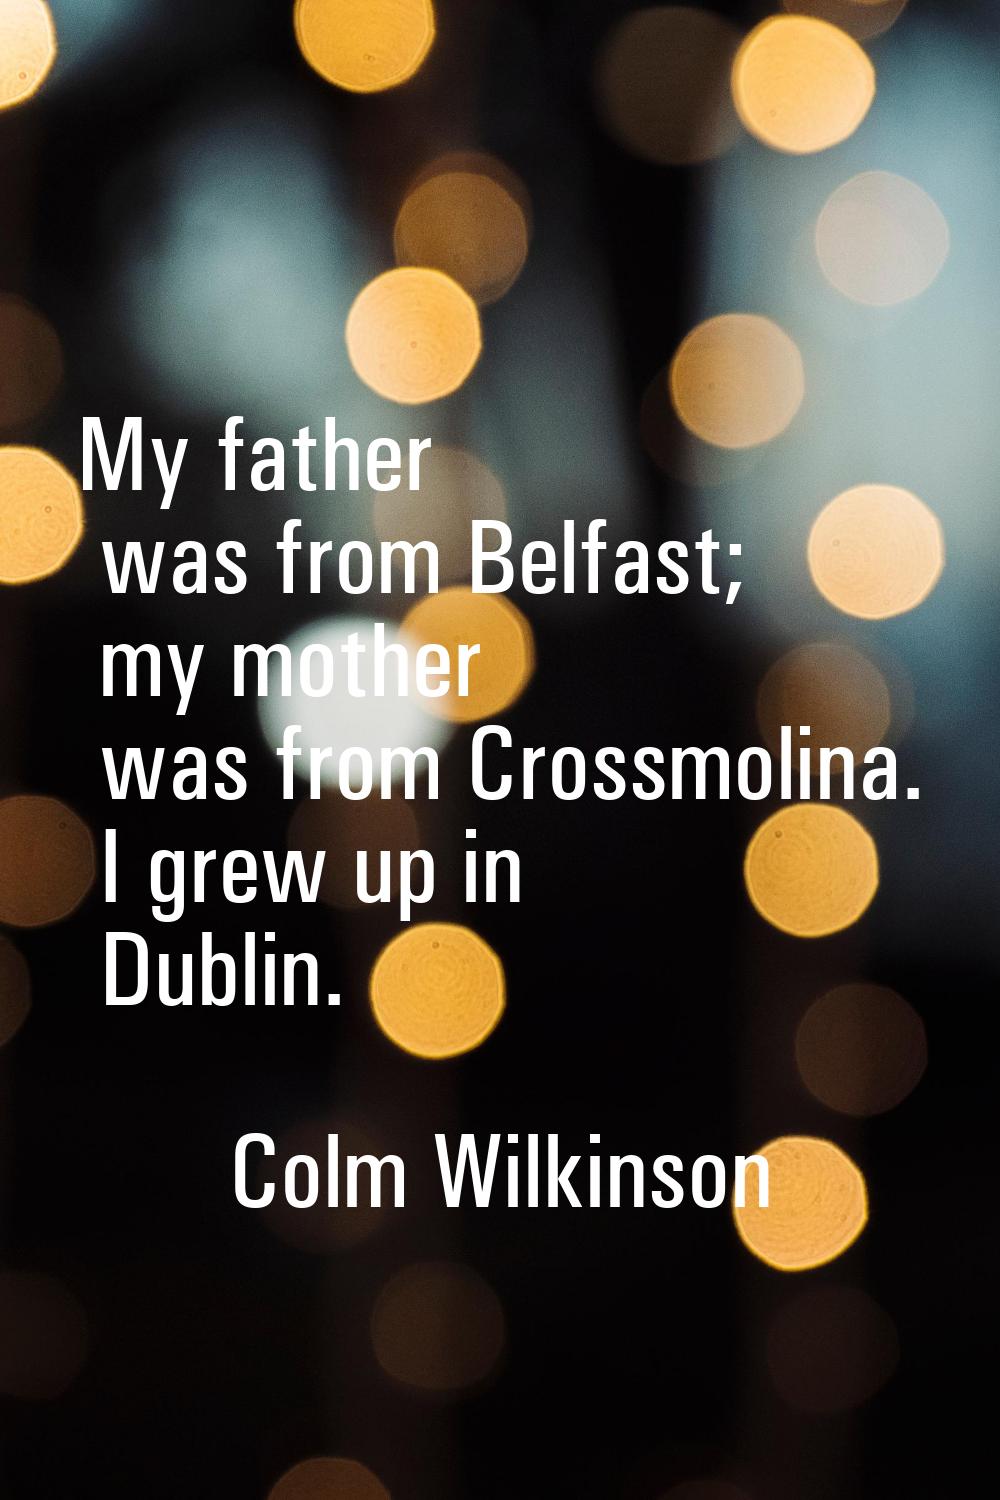 My father was from Belfast; my mother was from Crossmolina. I grew up in Dublin.